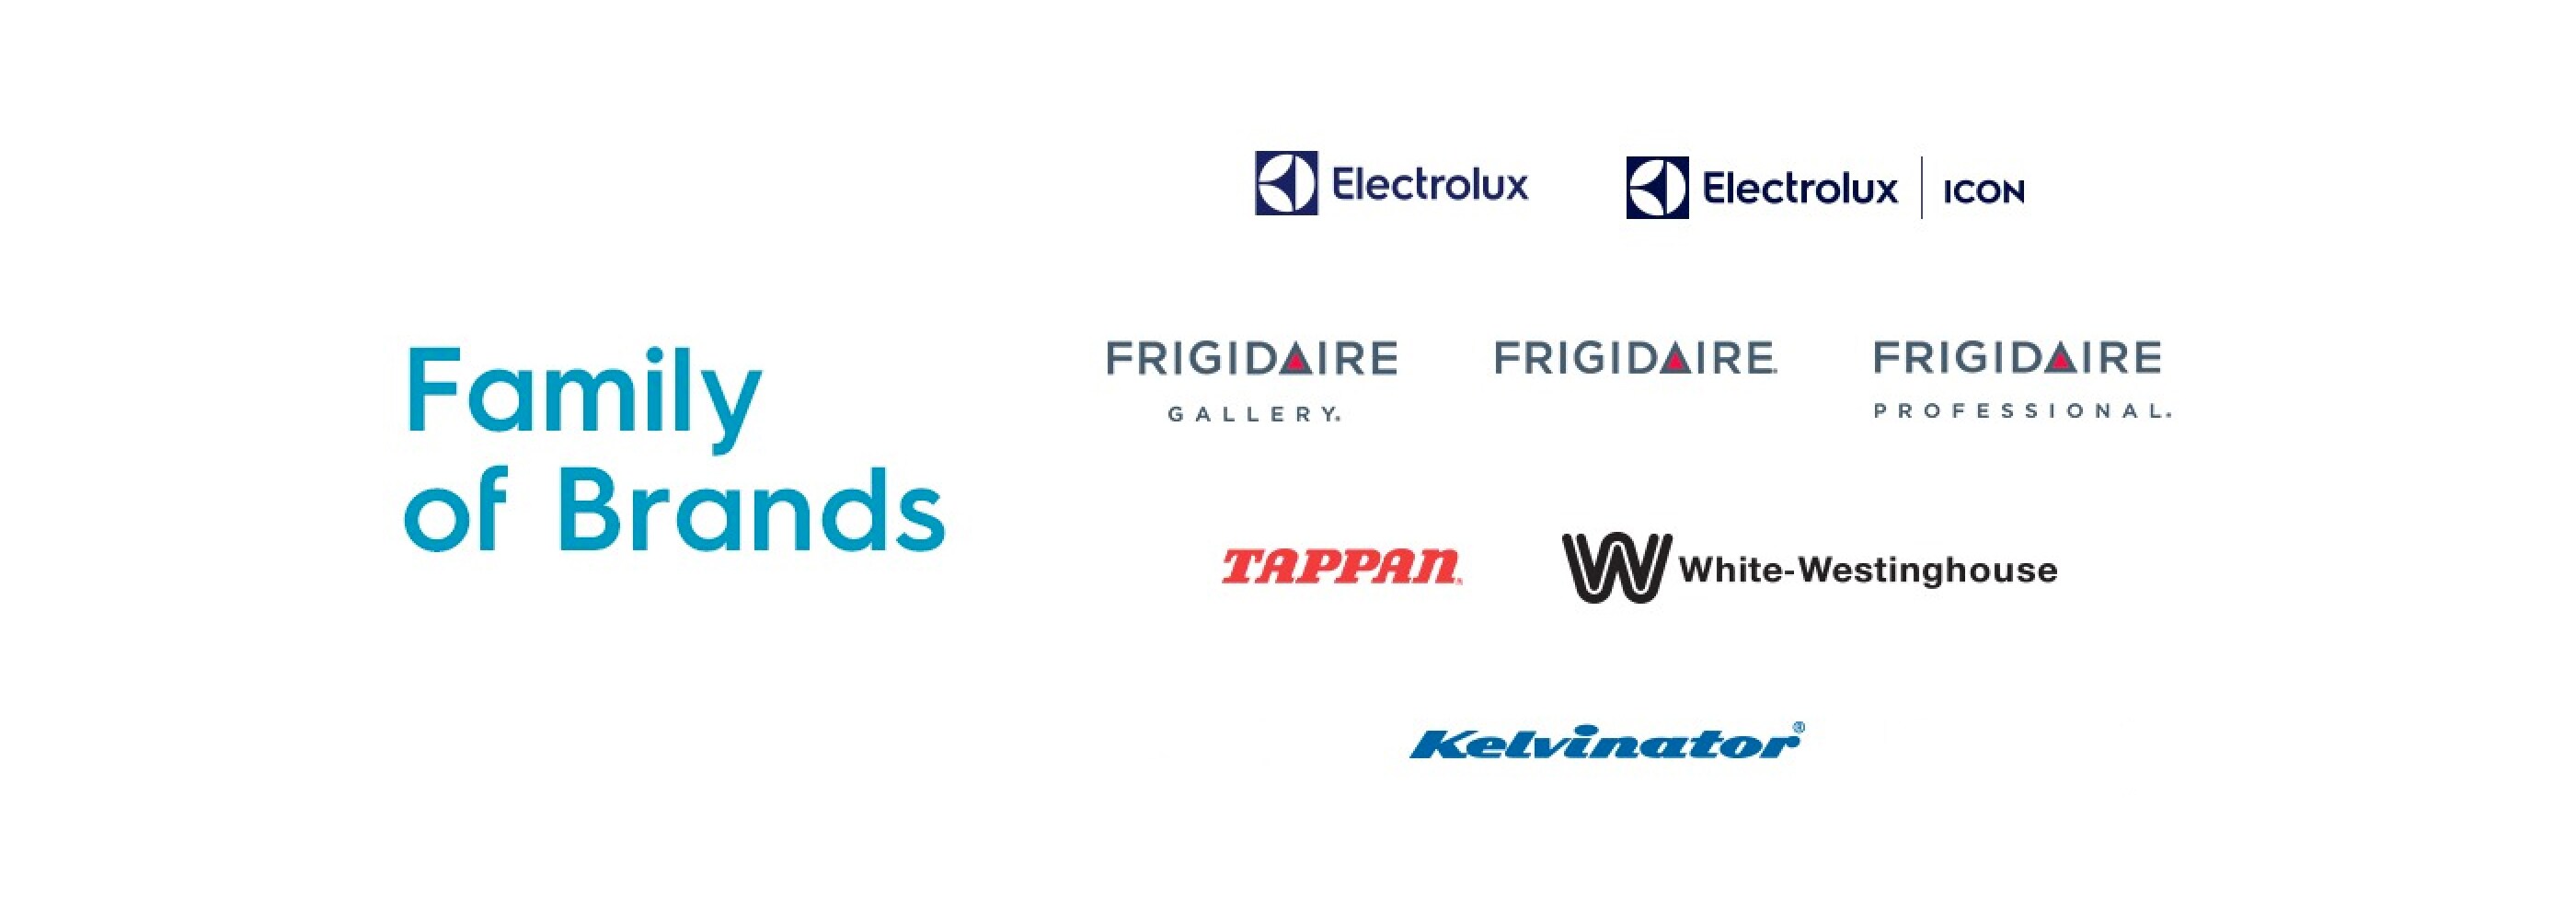 Electrolux Family of Brands